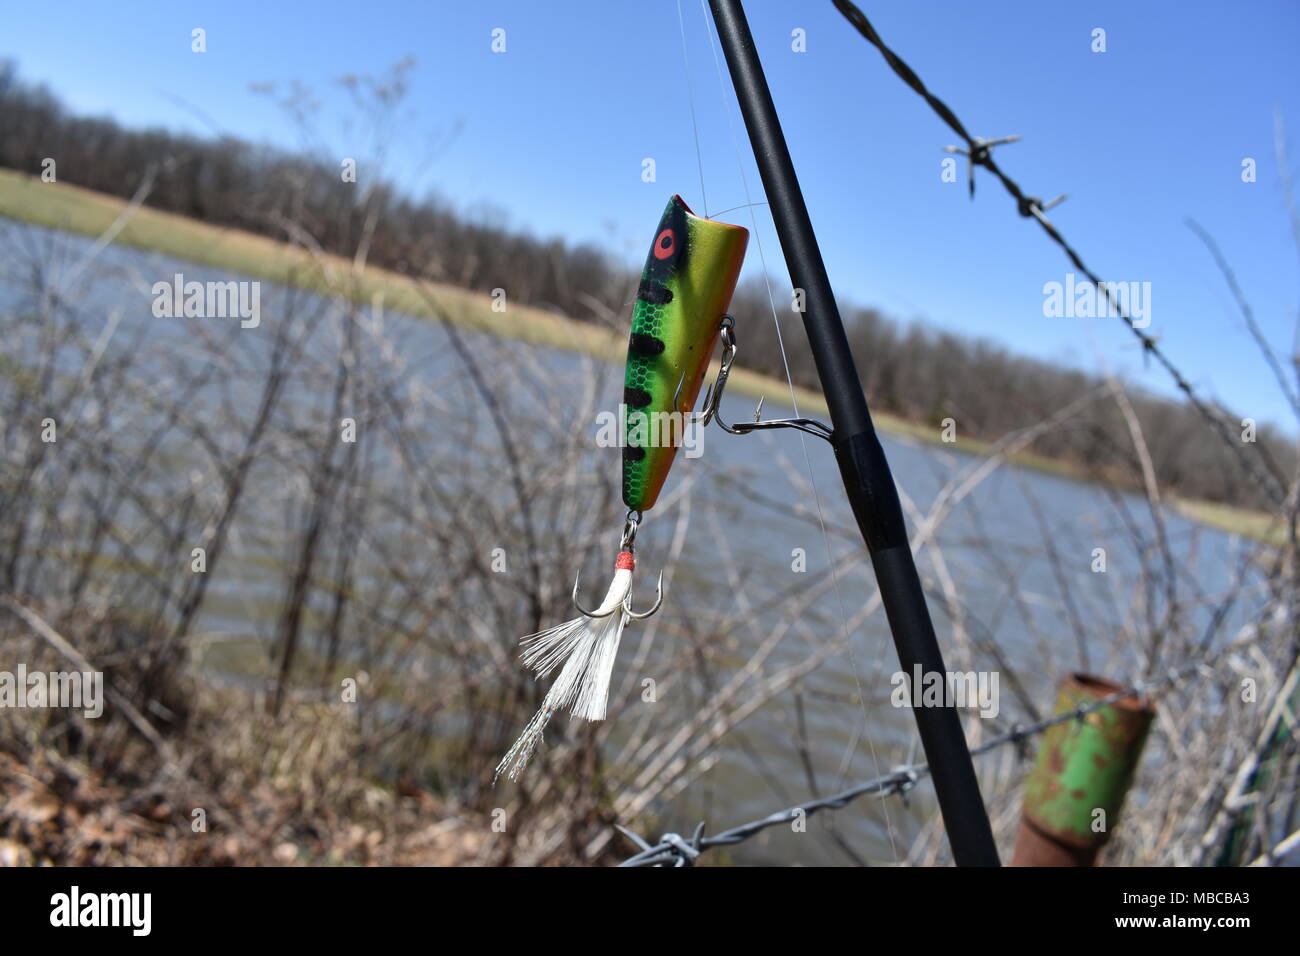 A close-up of a bass lure dangling from a fishing pole and a pond in the background calls to the fisherman. Rural Missouri, MO, United States, USA, US Stock Photo